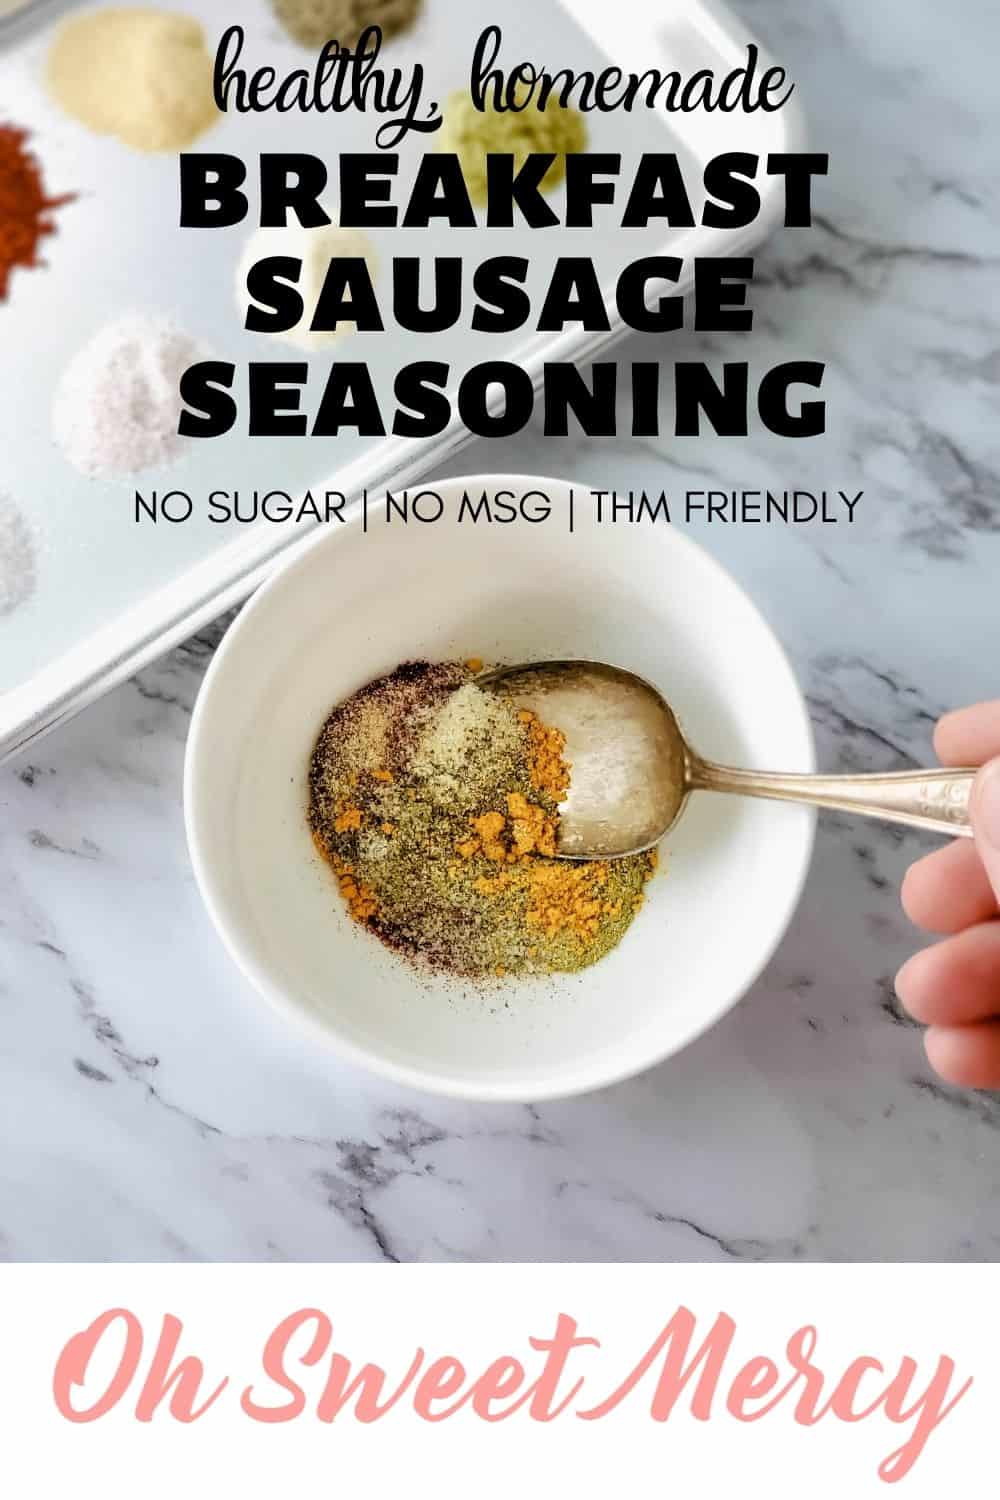 Keep this easy sugar free bulk breakfast sausage seasoning on hand to make healthy homemade breakfast sausage any time you need it. No sugars, MSG, preservatives, or other unwanted ingredients! #thm #diyseasoningmix #breakfast #healthy @ohsweetmercy